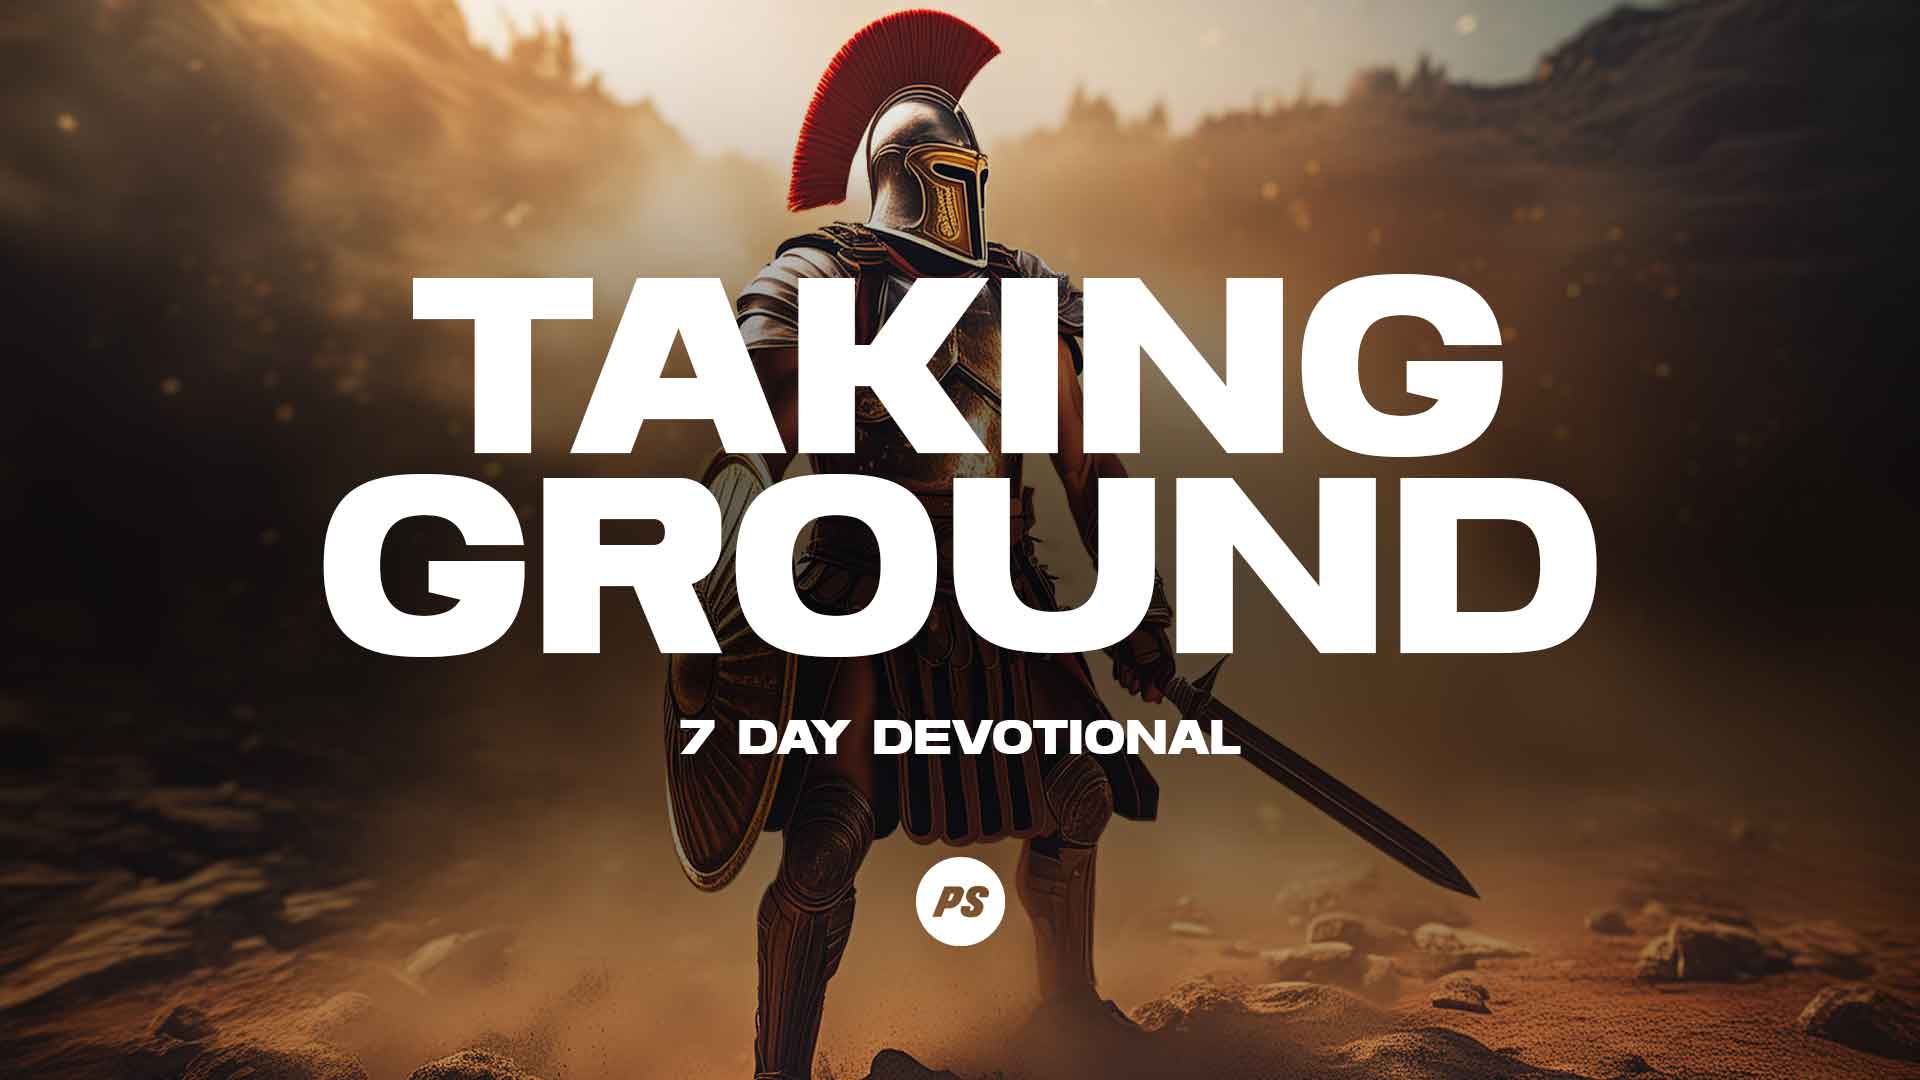 Featured Image for “Taking Ground 7 Day Devotional"